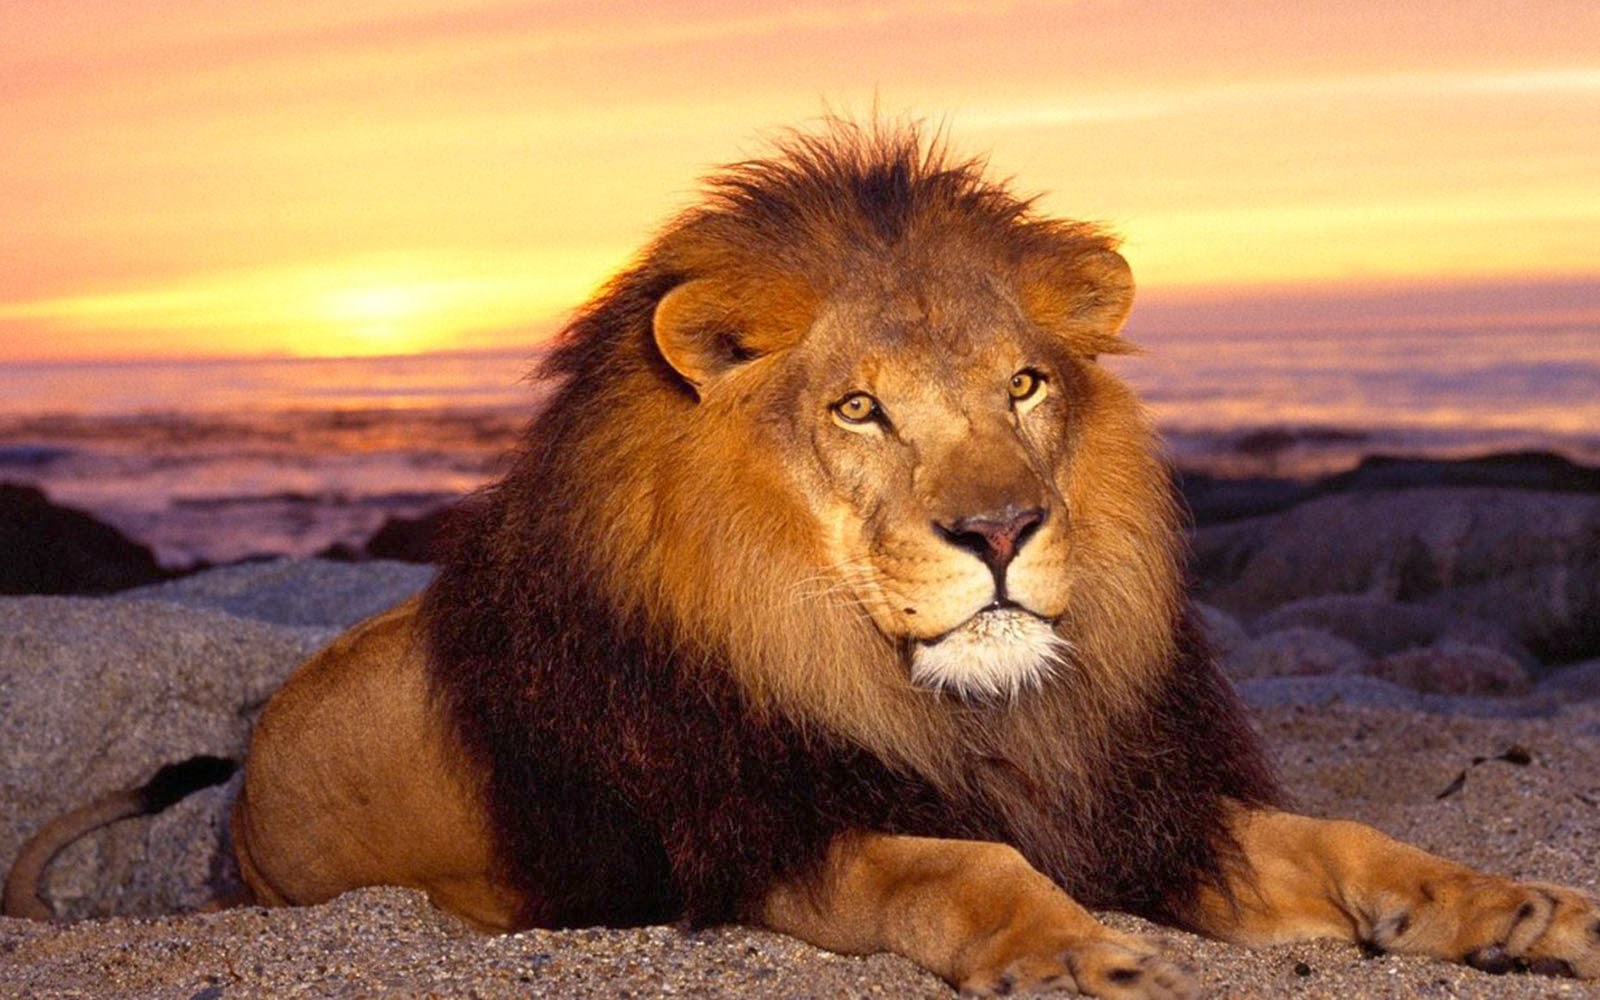 Image Africa Lion Desktop Background Pc Android iPhone And